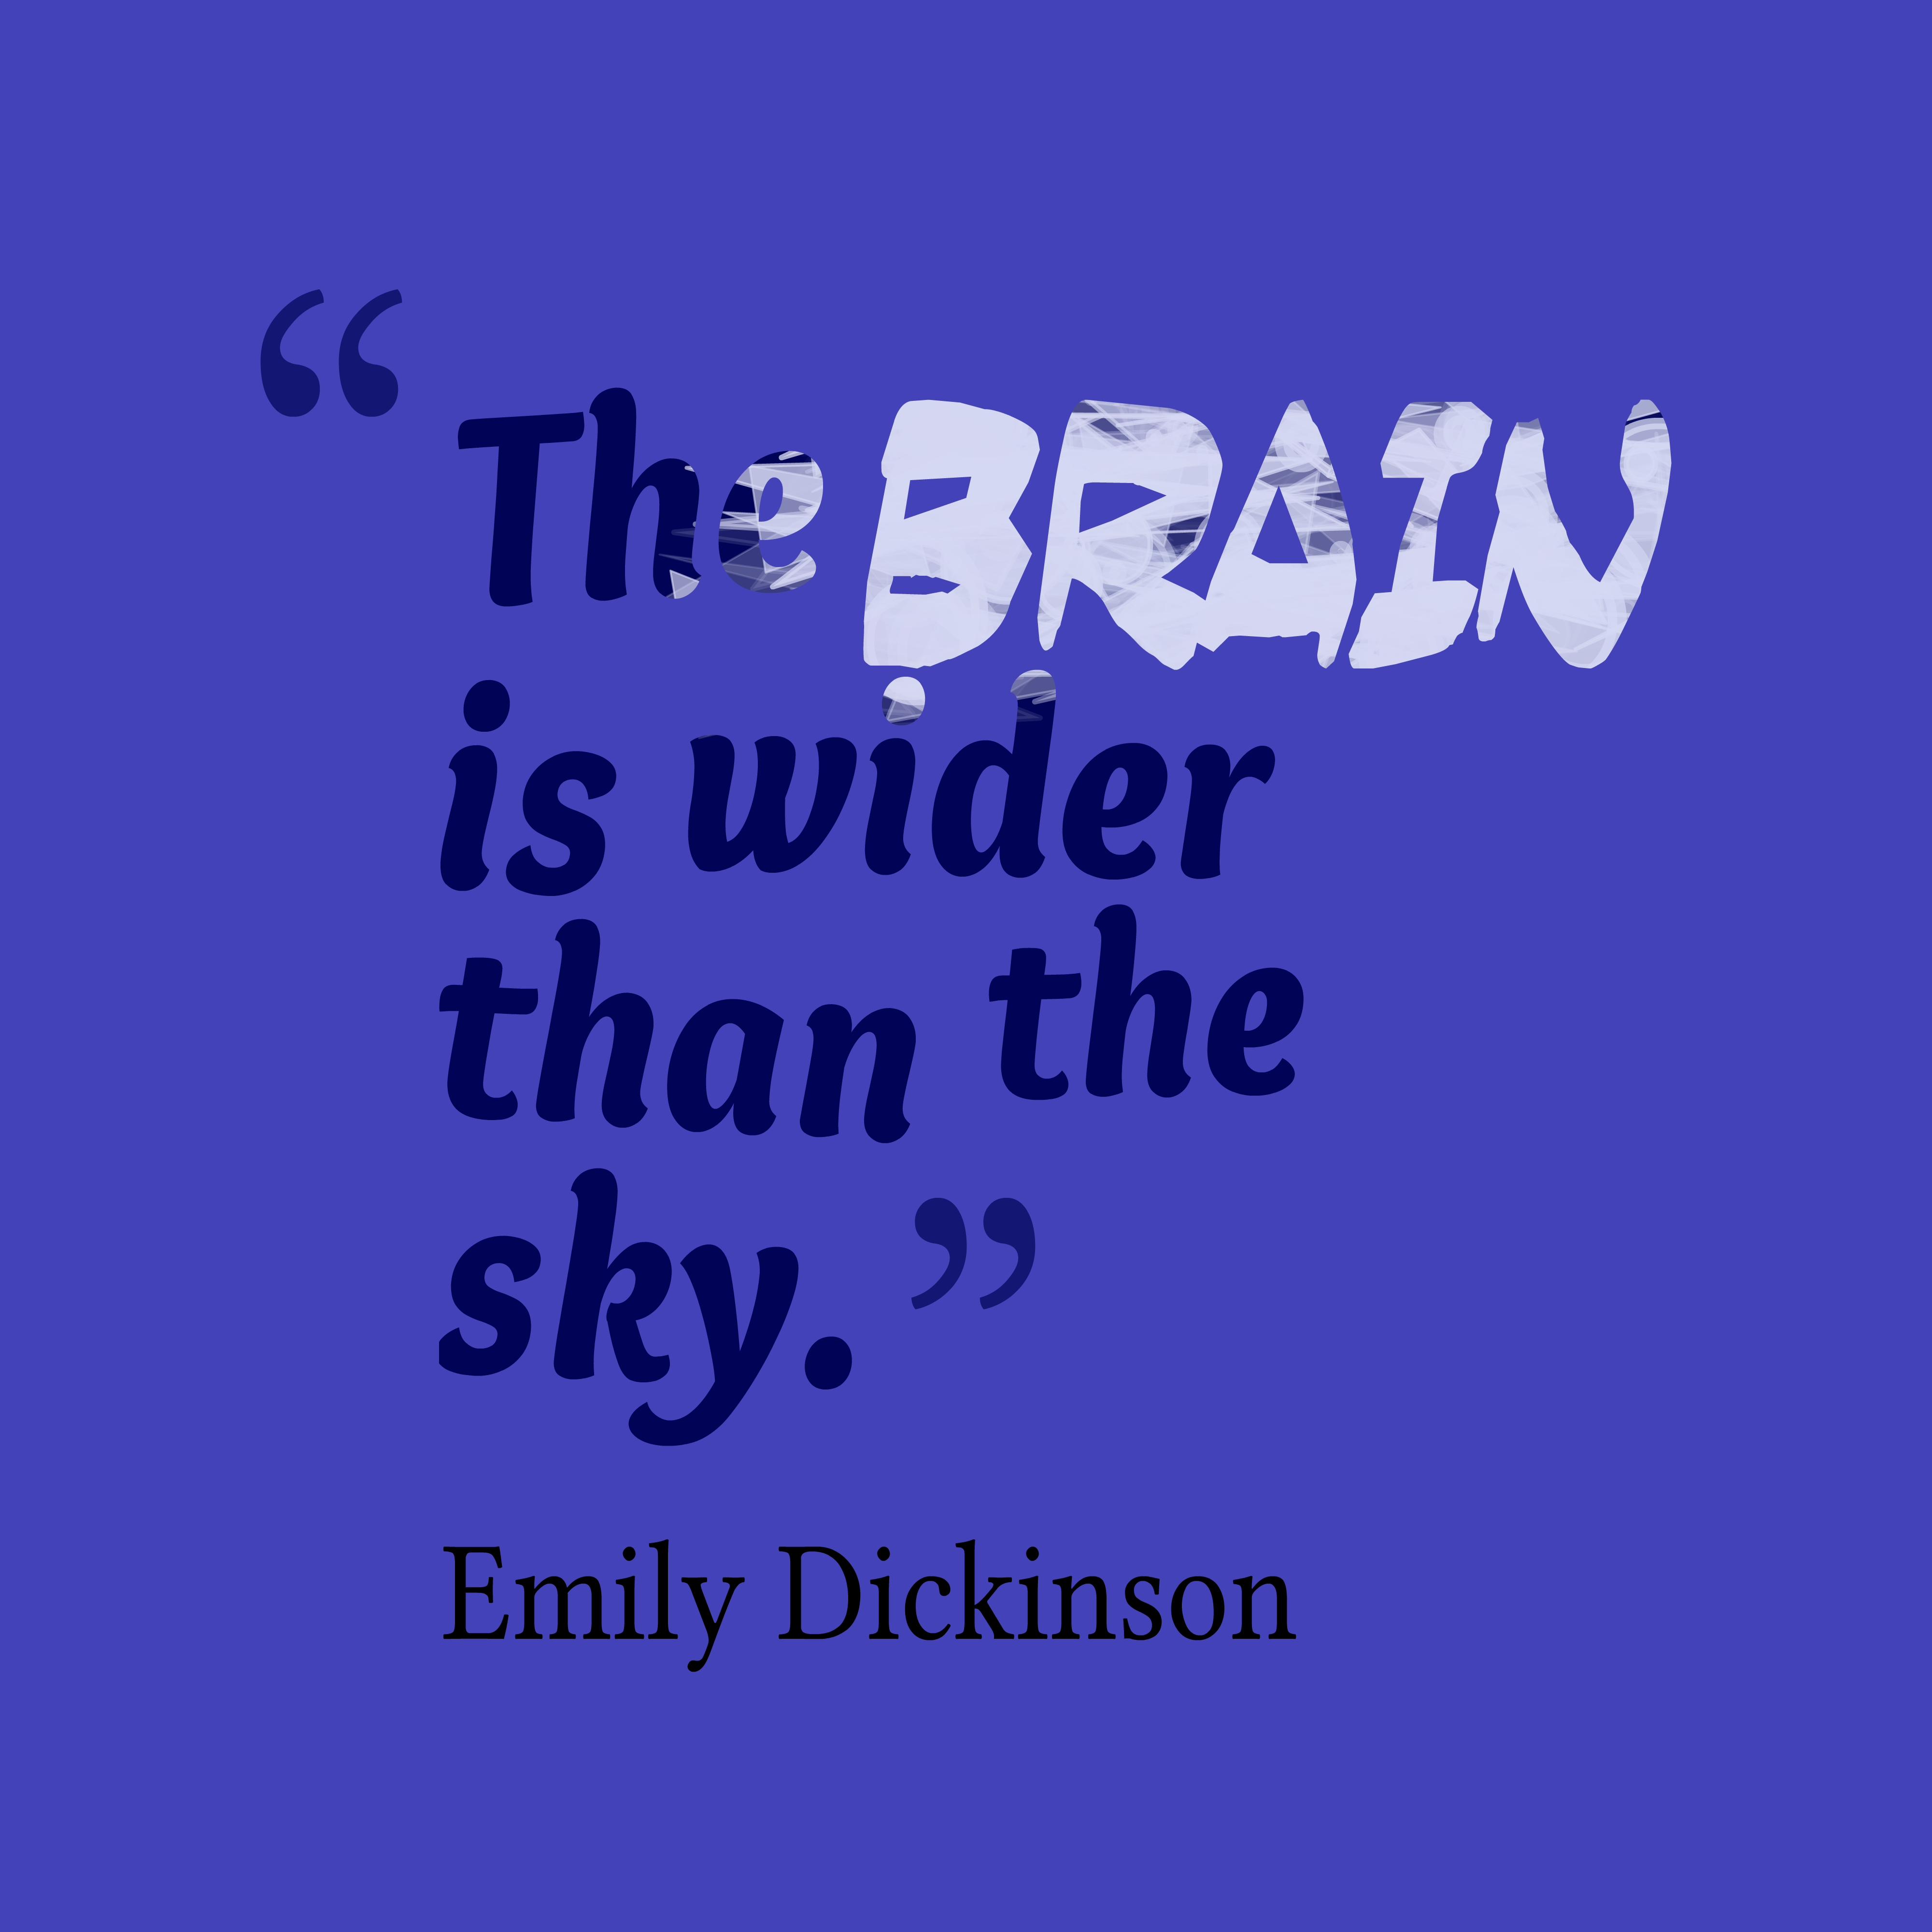 the brain is wider than the sky. emily dickinson